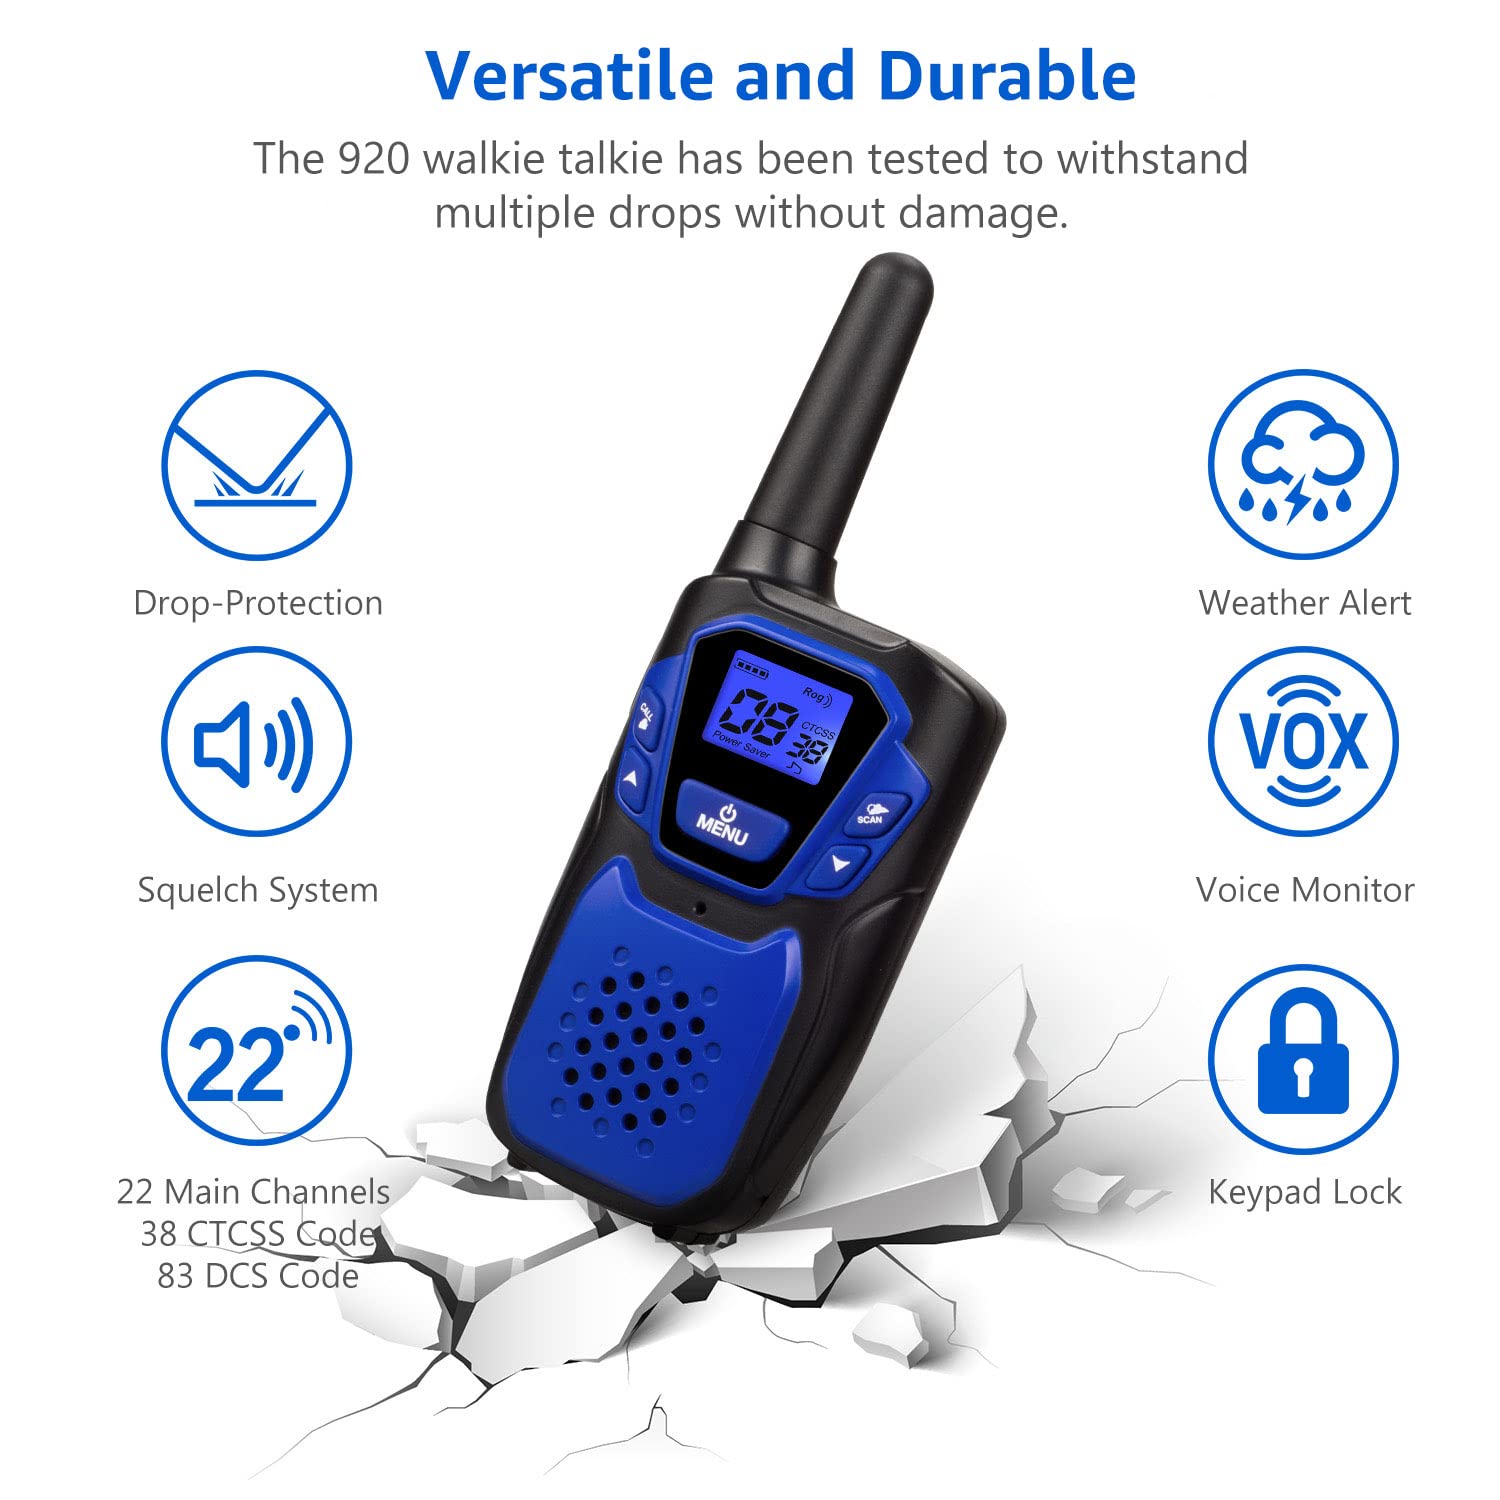 Topsung Walkie Talkies for Adult, Easy to Use Rechargeable Long Range Walky Talky Handheld Two Way Radio with NOAA for Hiking Camping（Blue Pack） - 2